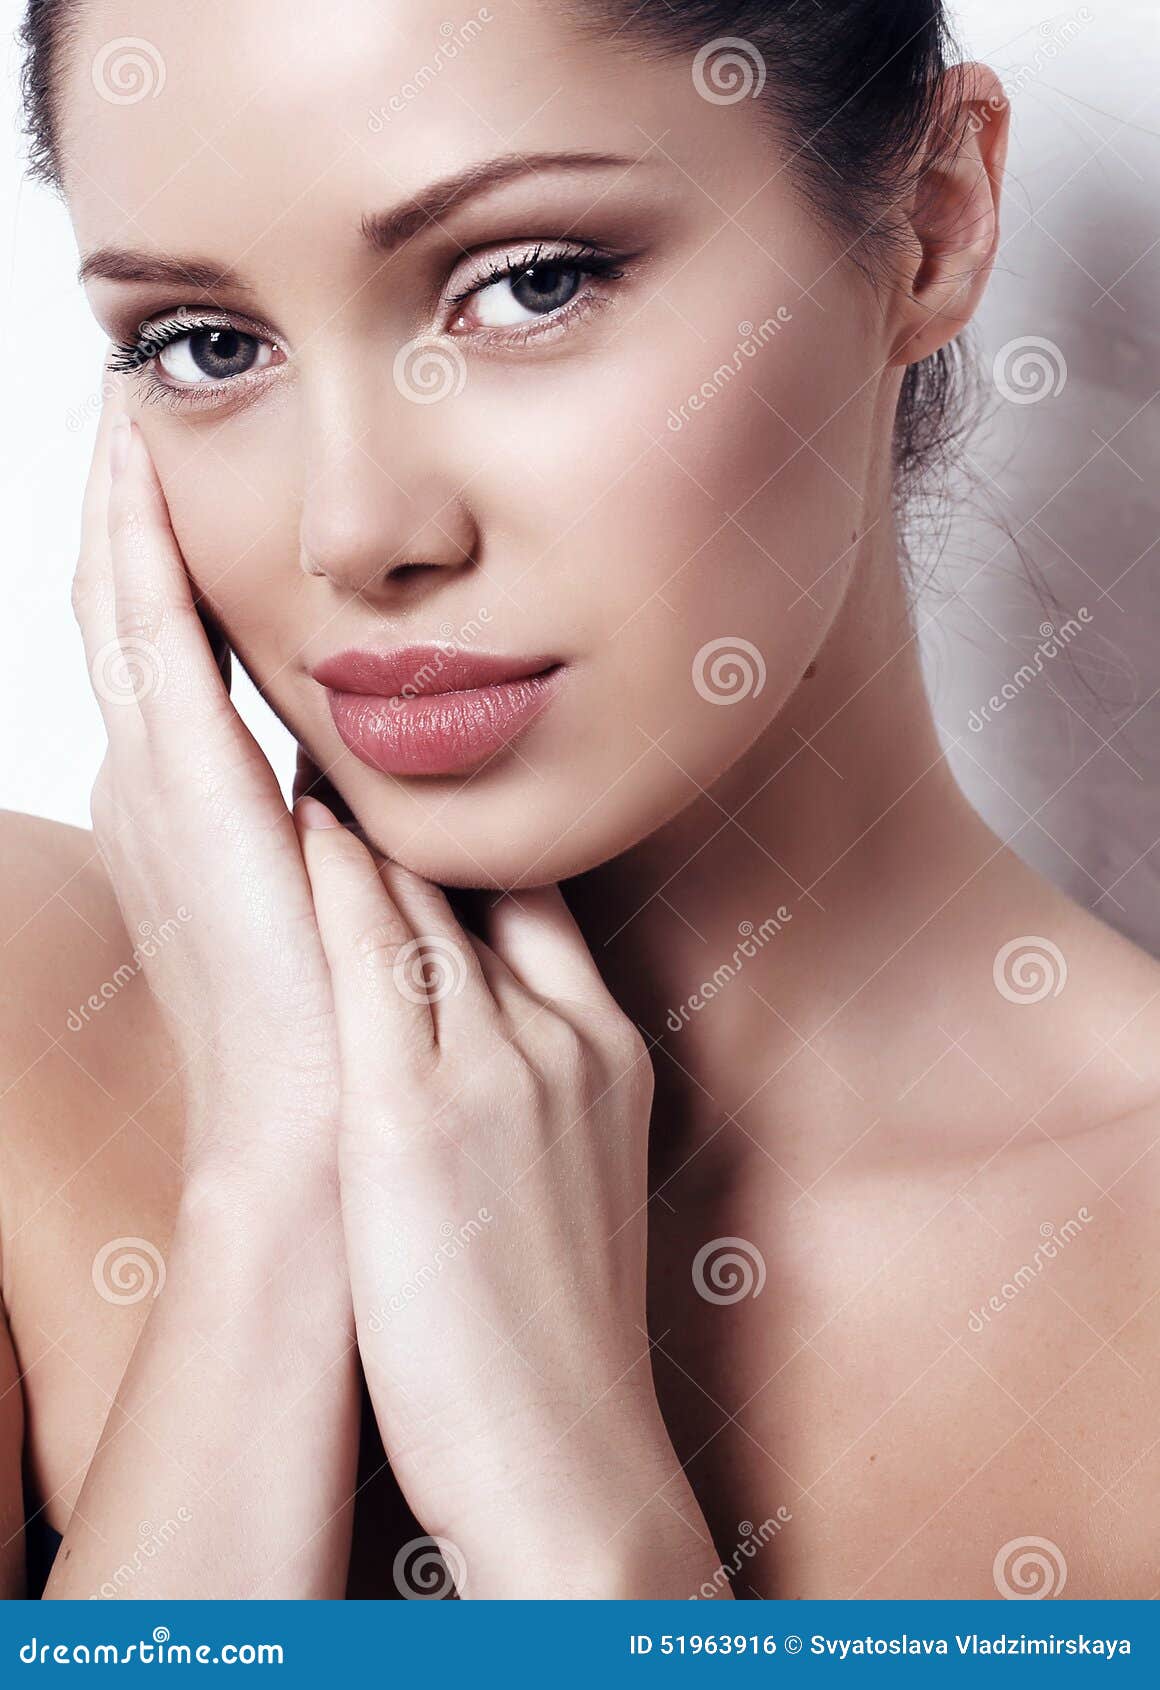 woman with dark hair with natural makeup and radiance health skin posing